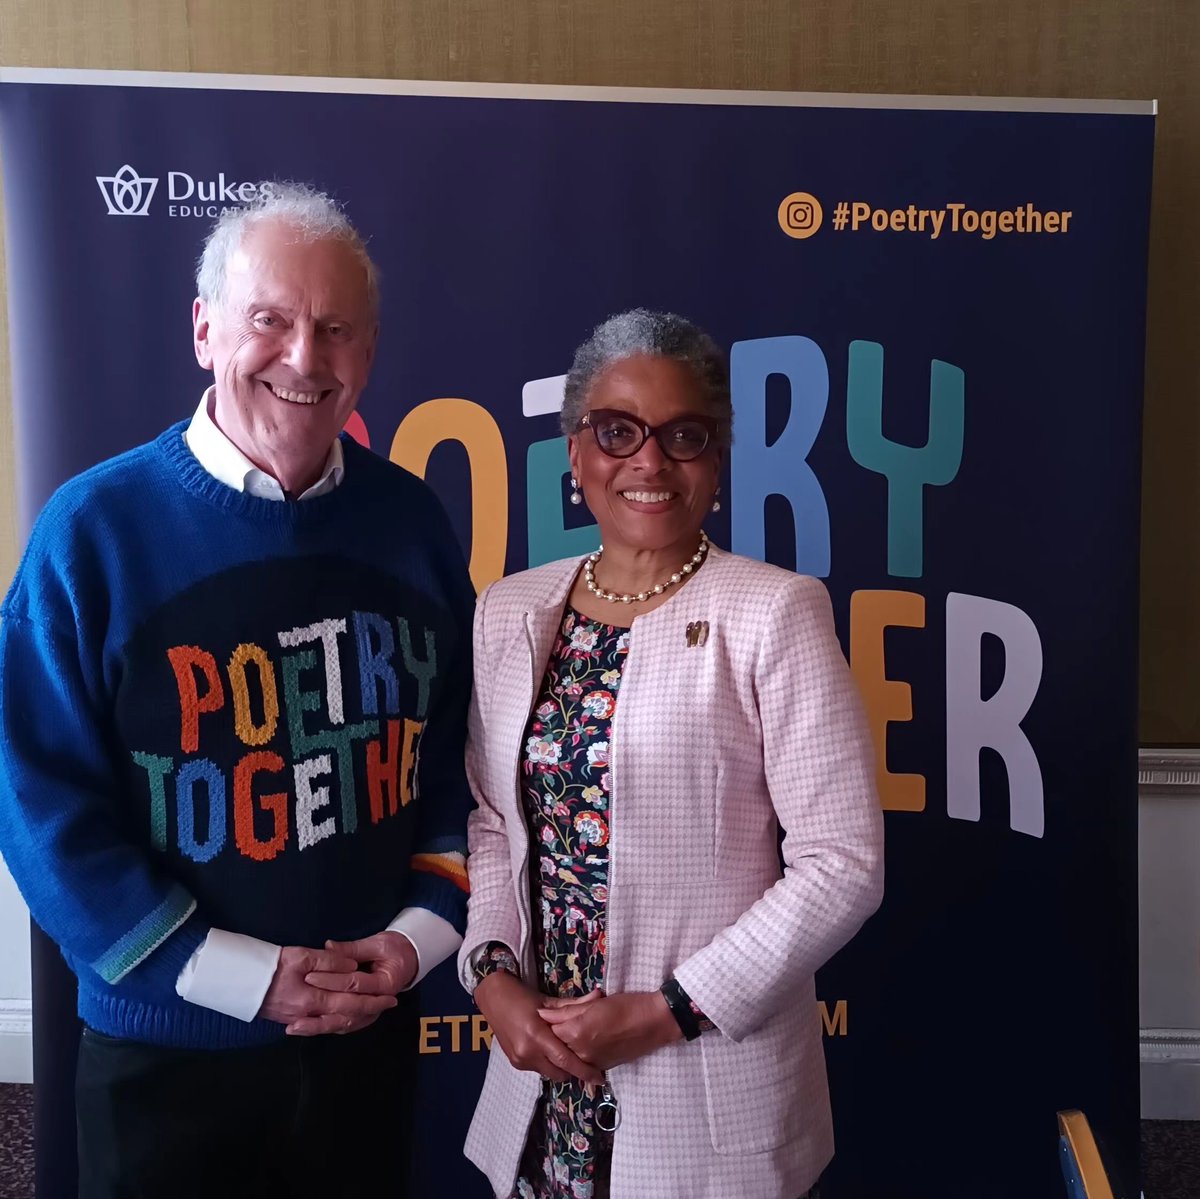 #Poetrytogether

Uniting elders and youngsters to write poetry on a theme - whether determined locally or aligning with the national one - brings joy, creativity and social cohesion to the forefront.

Let's do this in #Bristol!

@GylesB1 @FloellaBenjamin